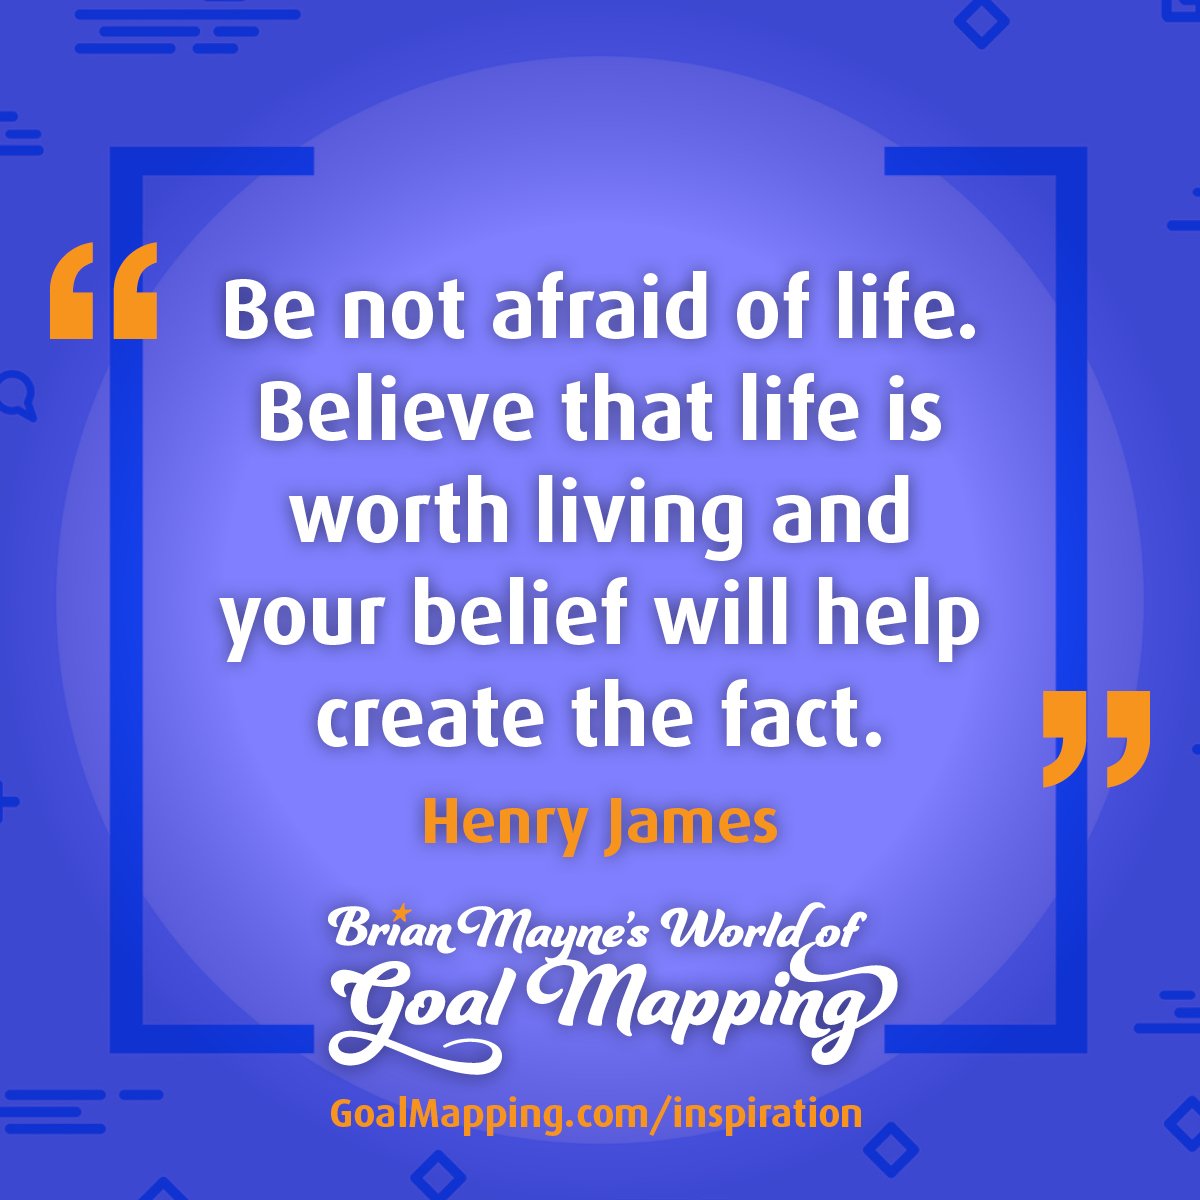 "Be not afraid of life. Believe that life is worth living andyour belief will help create the fact." Henry James